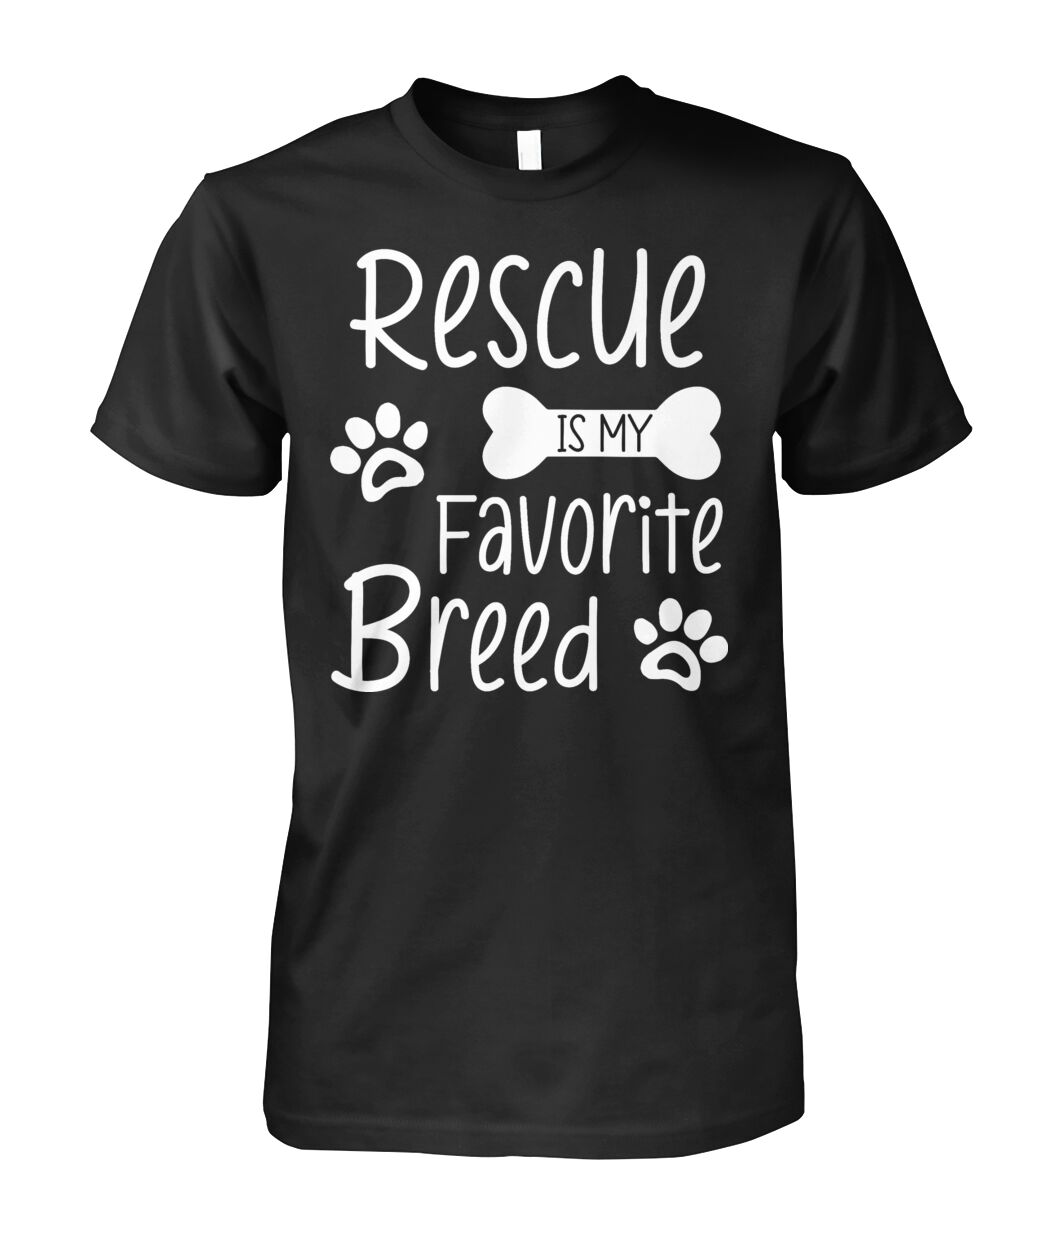 Rescue Is My Favorite Breed Shirt (White Text)